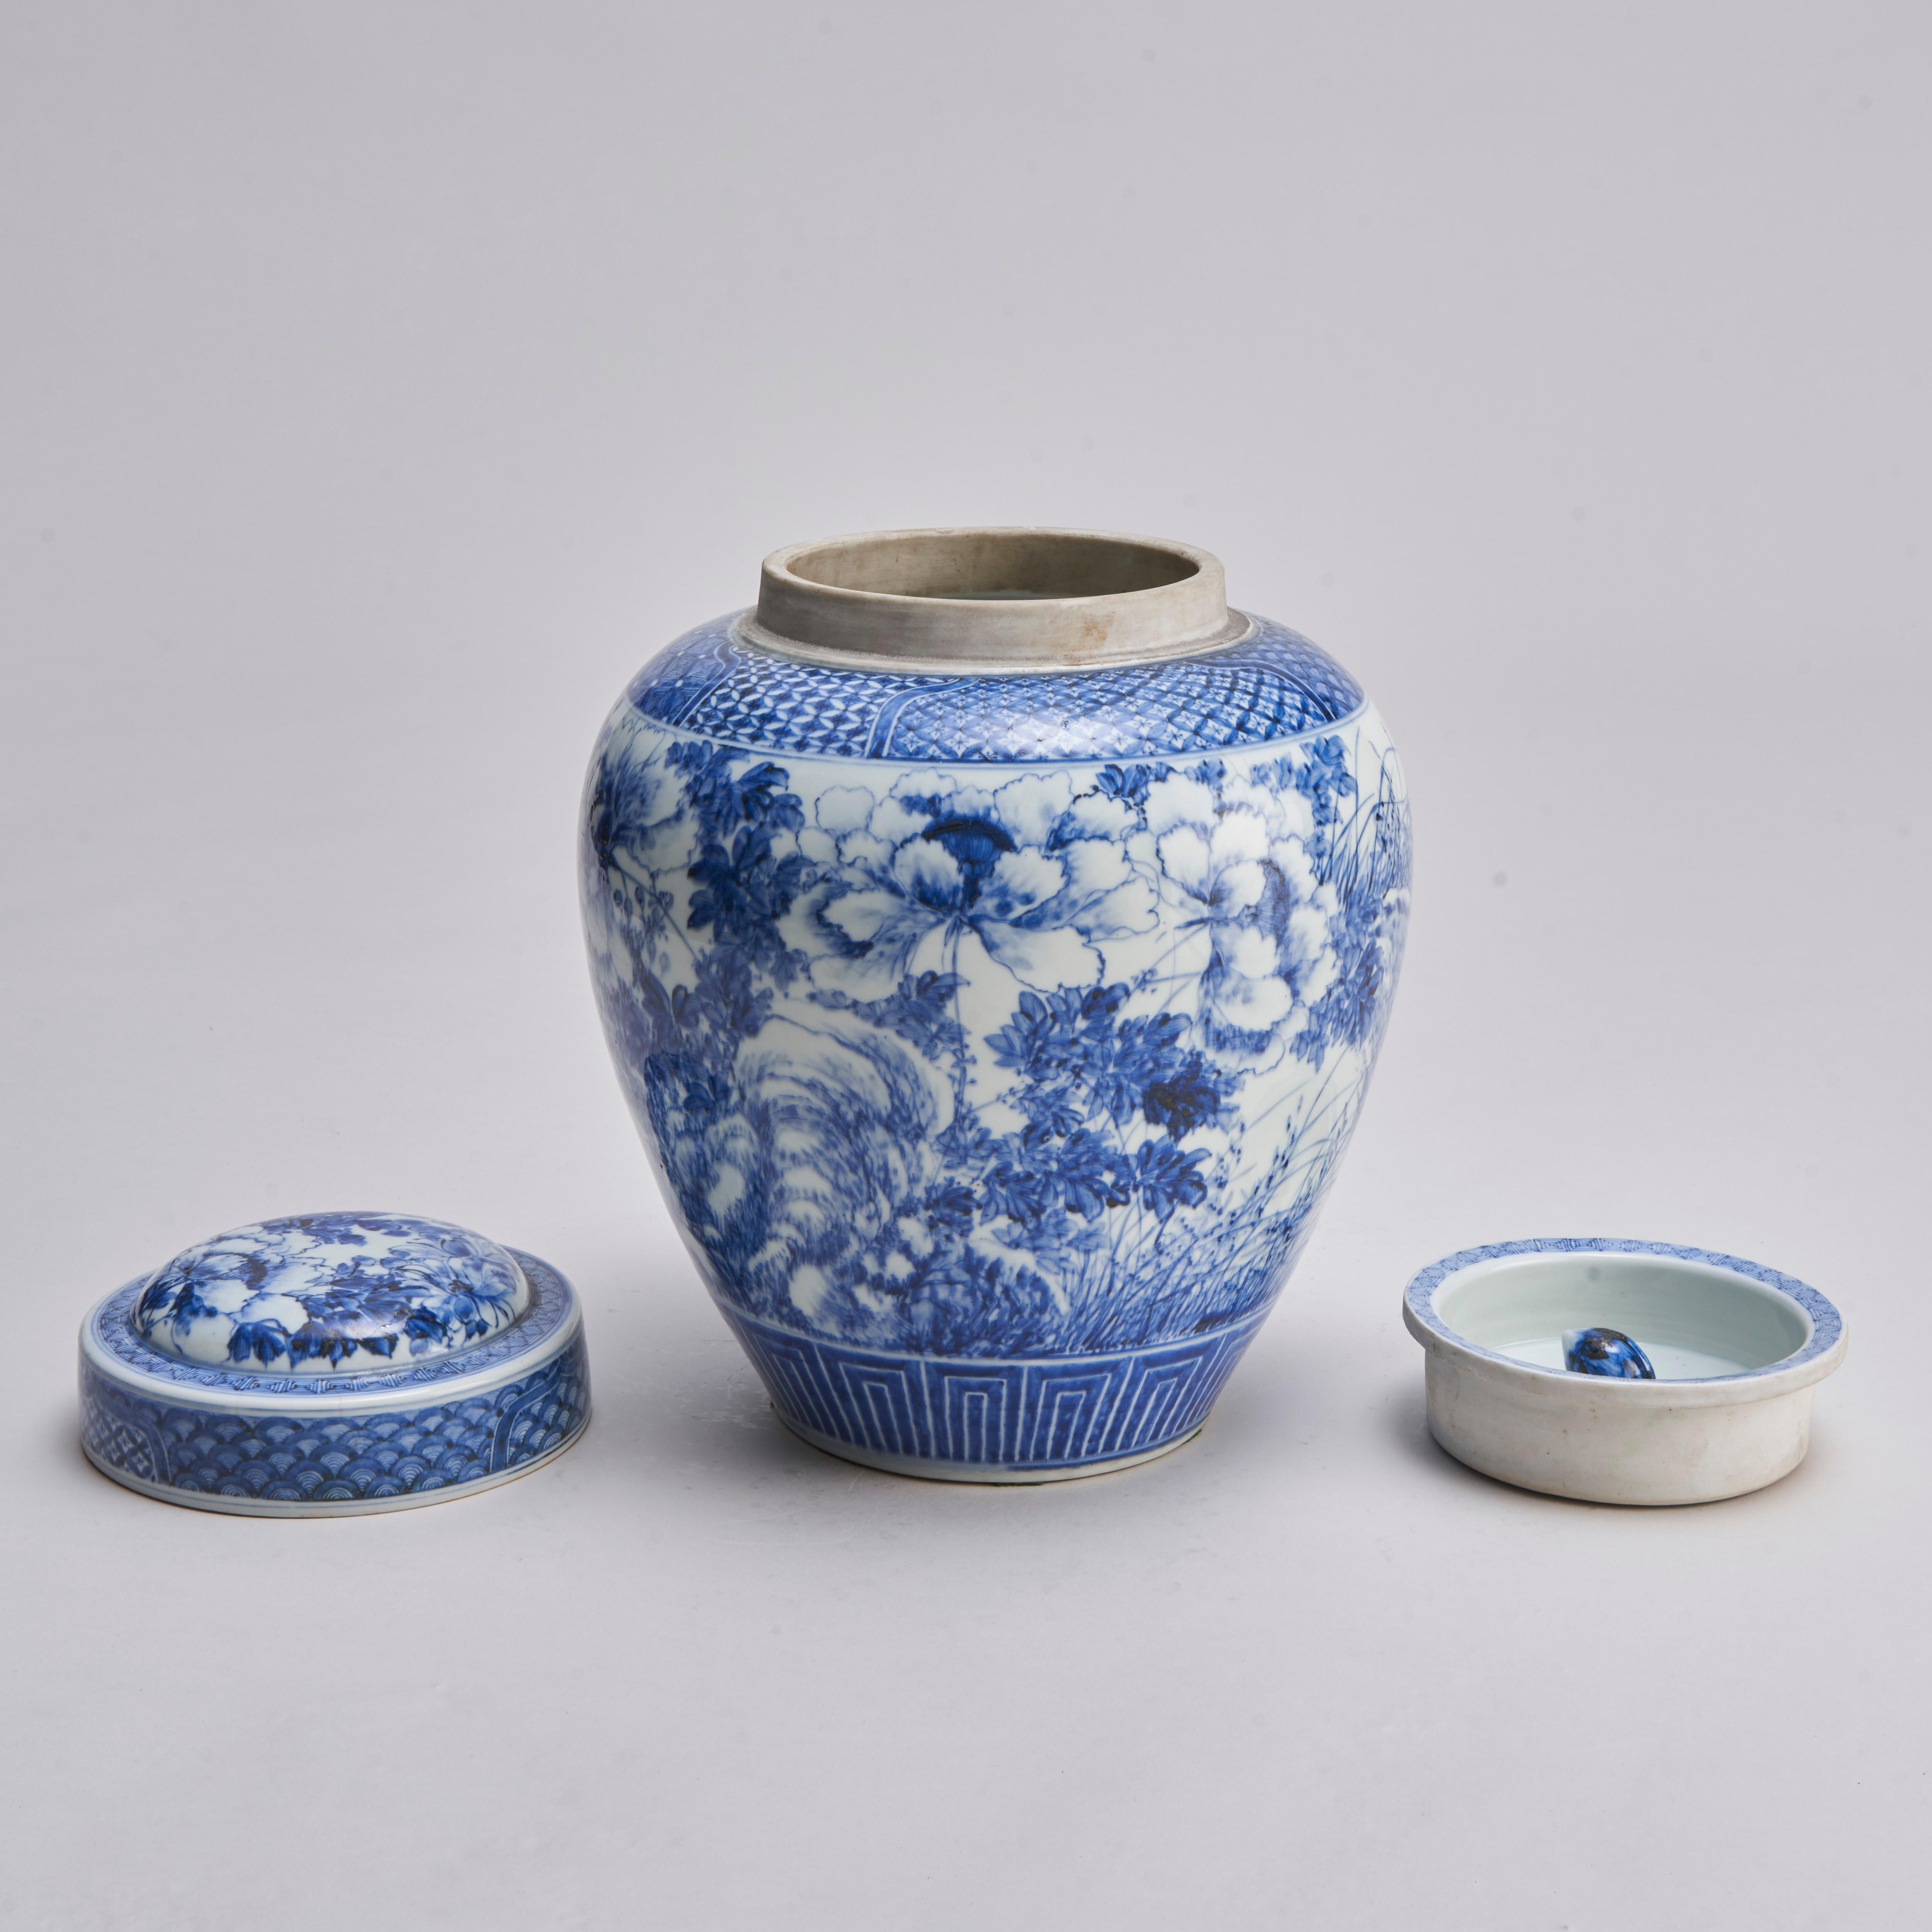 An unusual Japanese porcelain blue and white jar with inner stopper For Sale 3